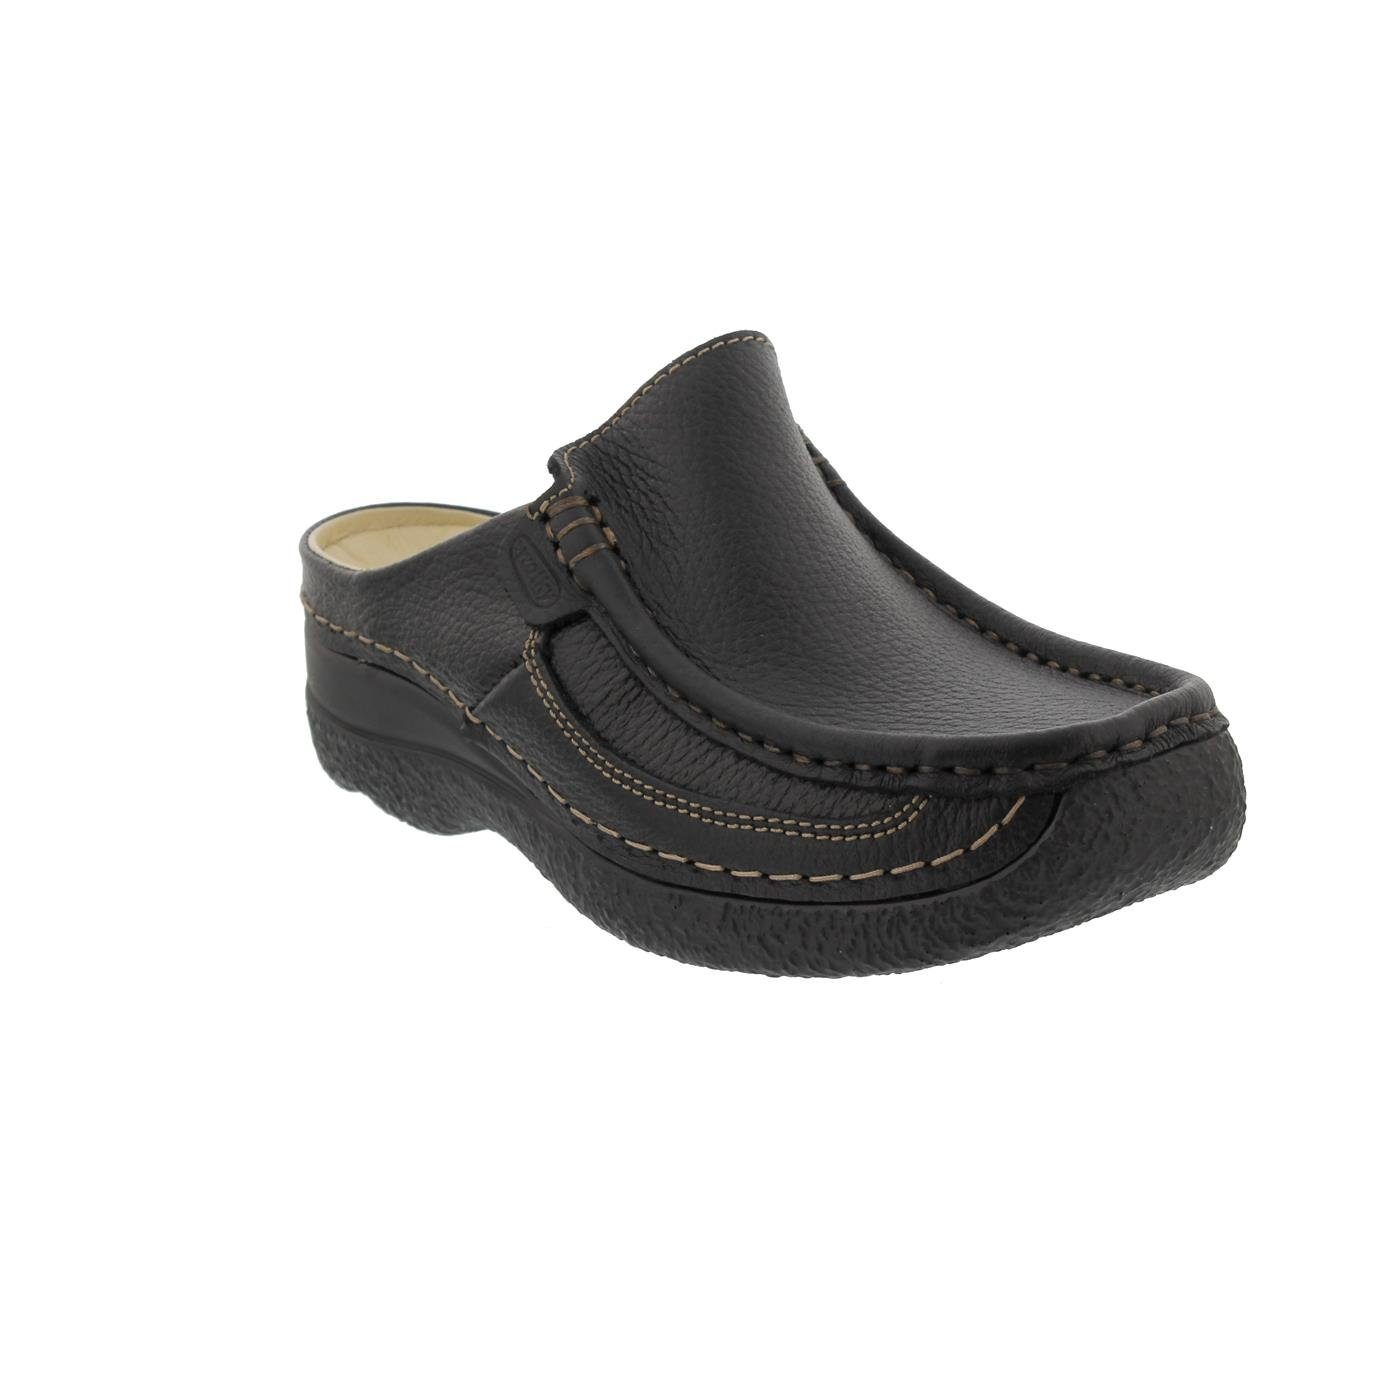 Printed Clog, black, WOLKY Roll-Slide, Clog leather, 0620270-000